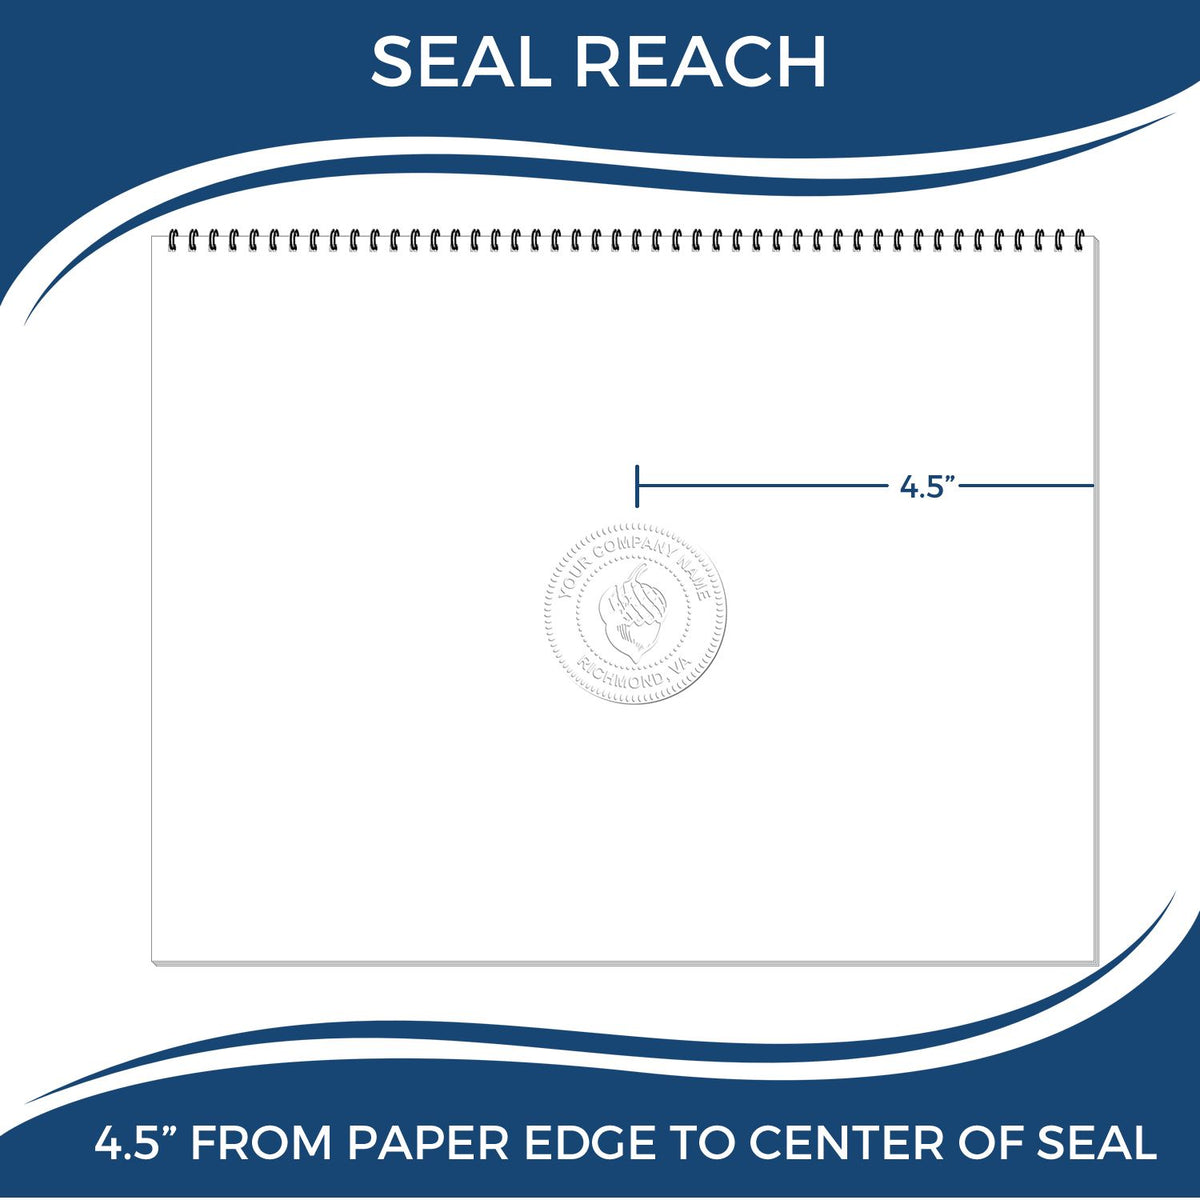 An infographic showing the seal reach which is represented by a ruler and a miniature seal image of the Extended Long Reach New York Architect Seal Embosser